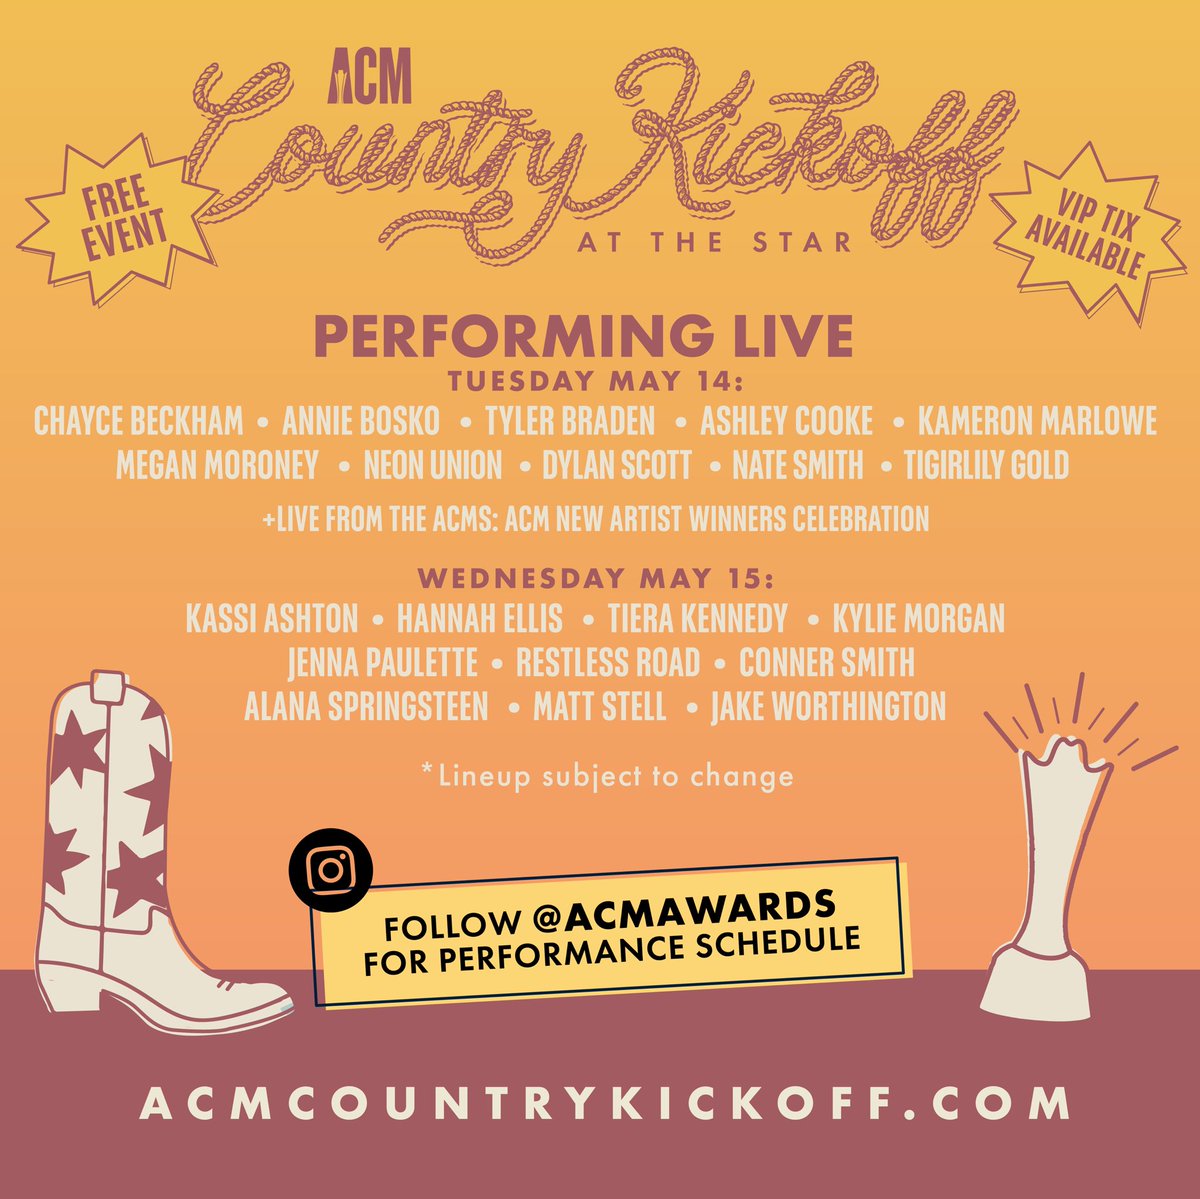 Gonna be a PARTY in Frisco, Texas next week 🎉 We’re so excited to be a part of ACM Country Kickoff at @thestarinfrisco to get @ACMawards week started! It’s a FREE event, with live music, food, & more... VIP tickets are on sale here: lnk.to/ACMkickoff #ACMkickoff #ACMawards